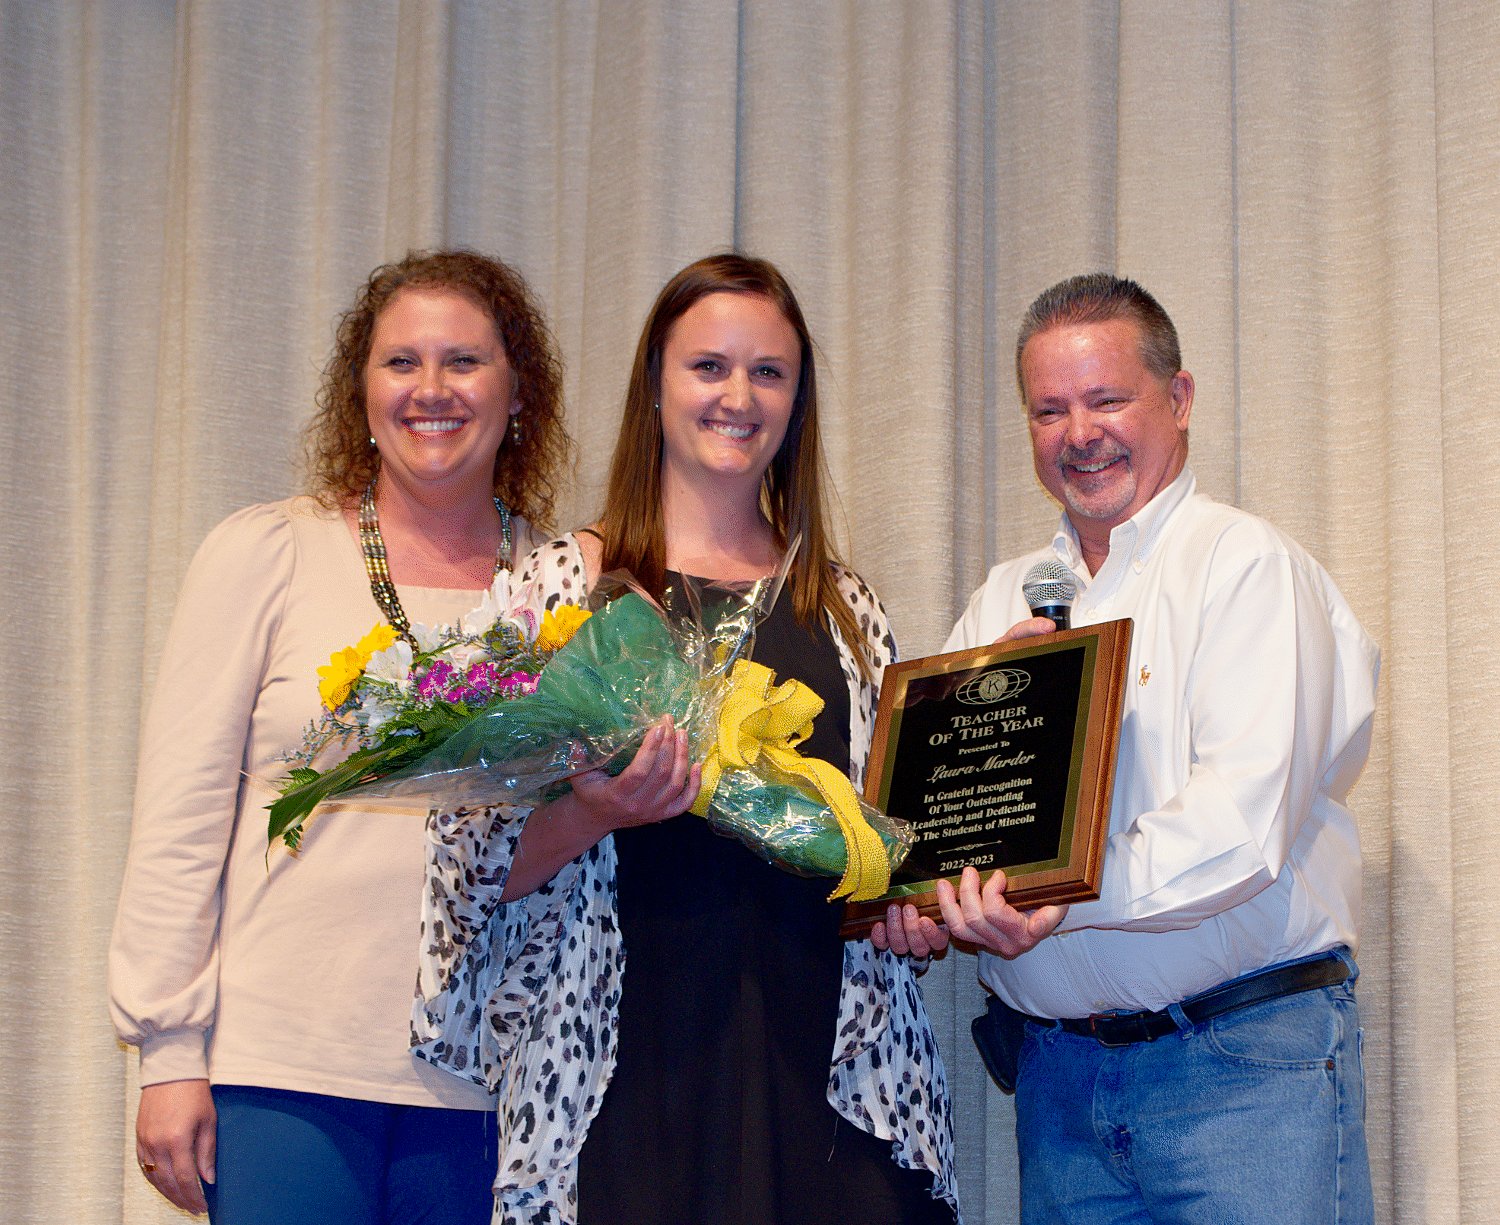 Laura Marder was named Mineola ISD teacher of the year, presented by members of the Mineola Kiwanis Club Amy Castleberry, left, and Brian Jones.